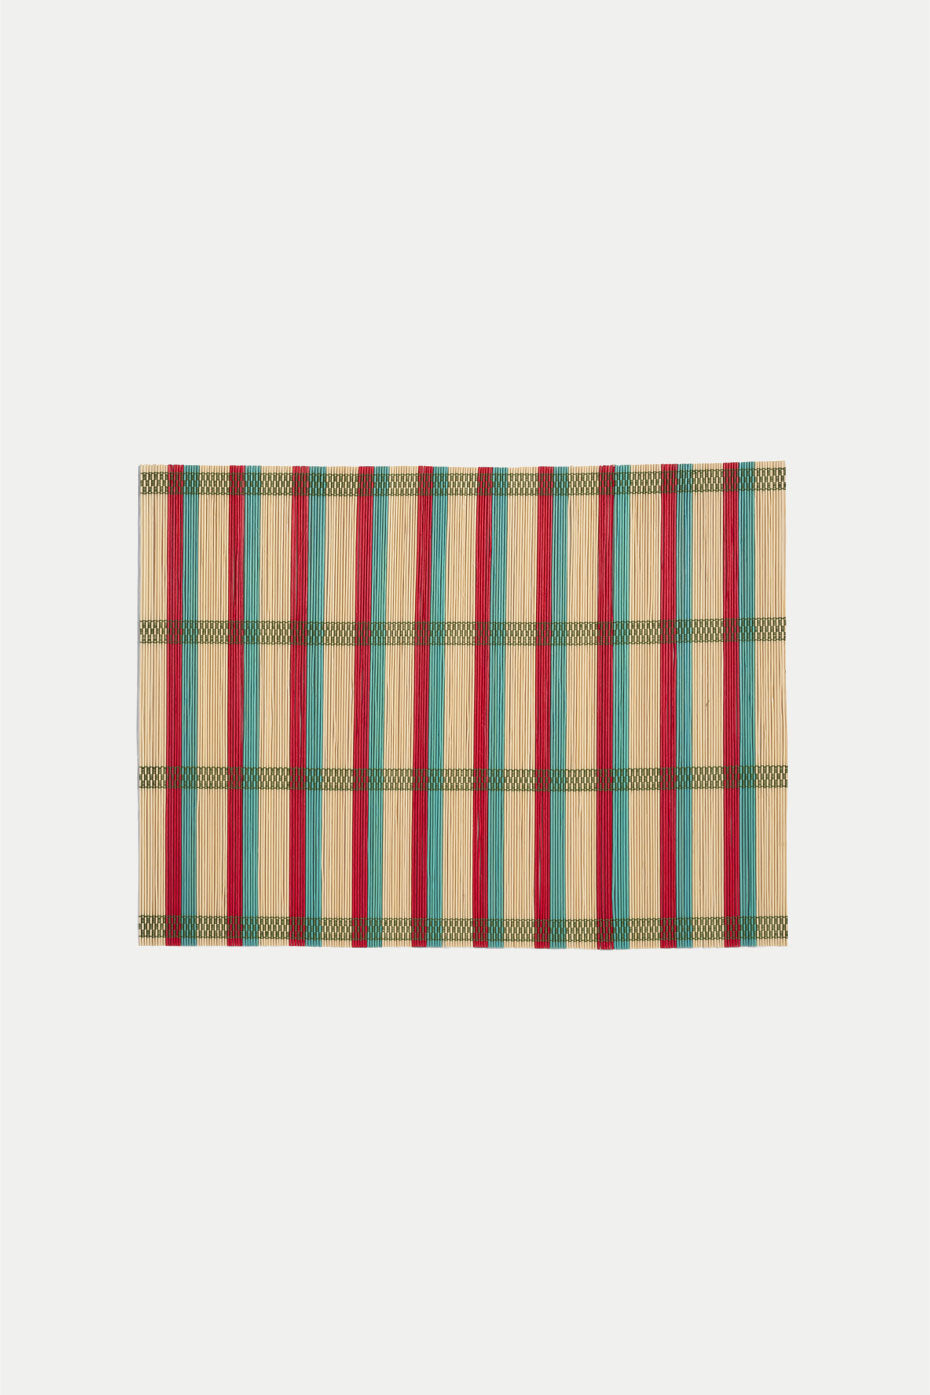 &klevering Red & Turquoise Umami Placemat